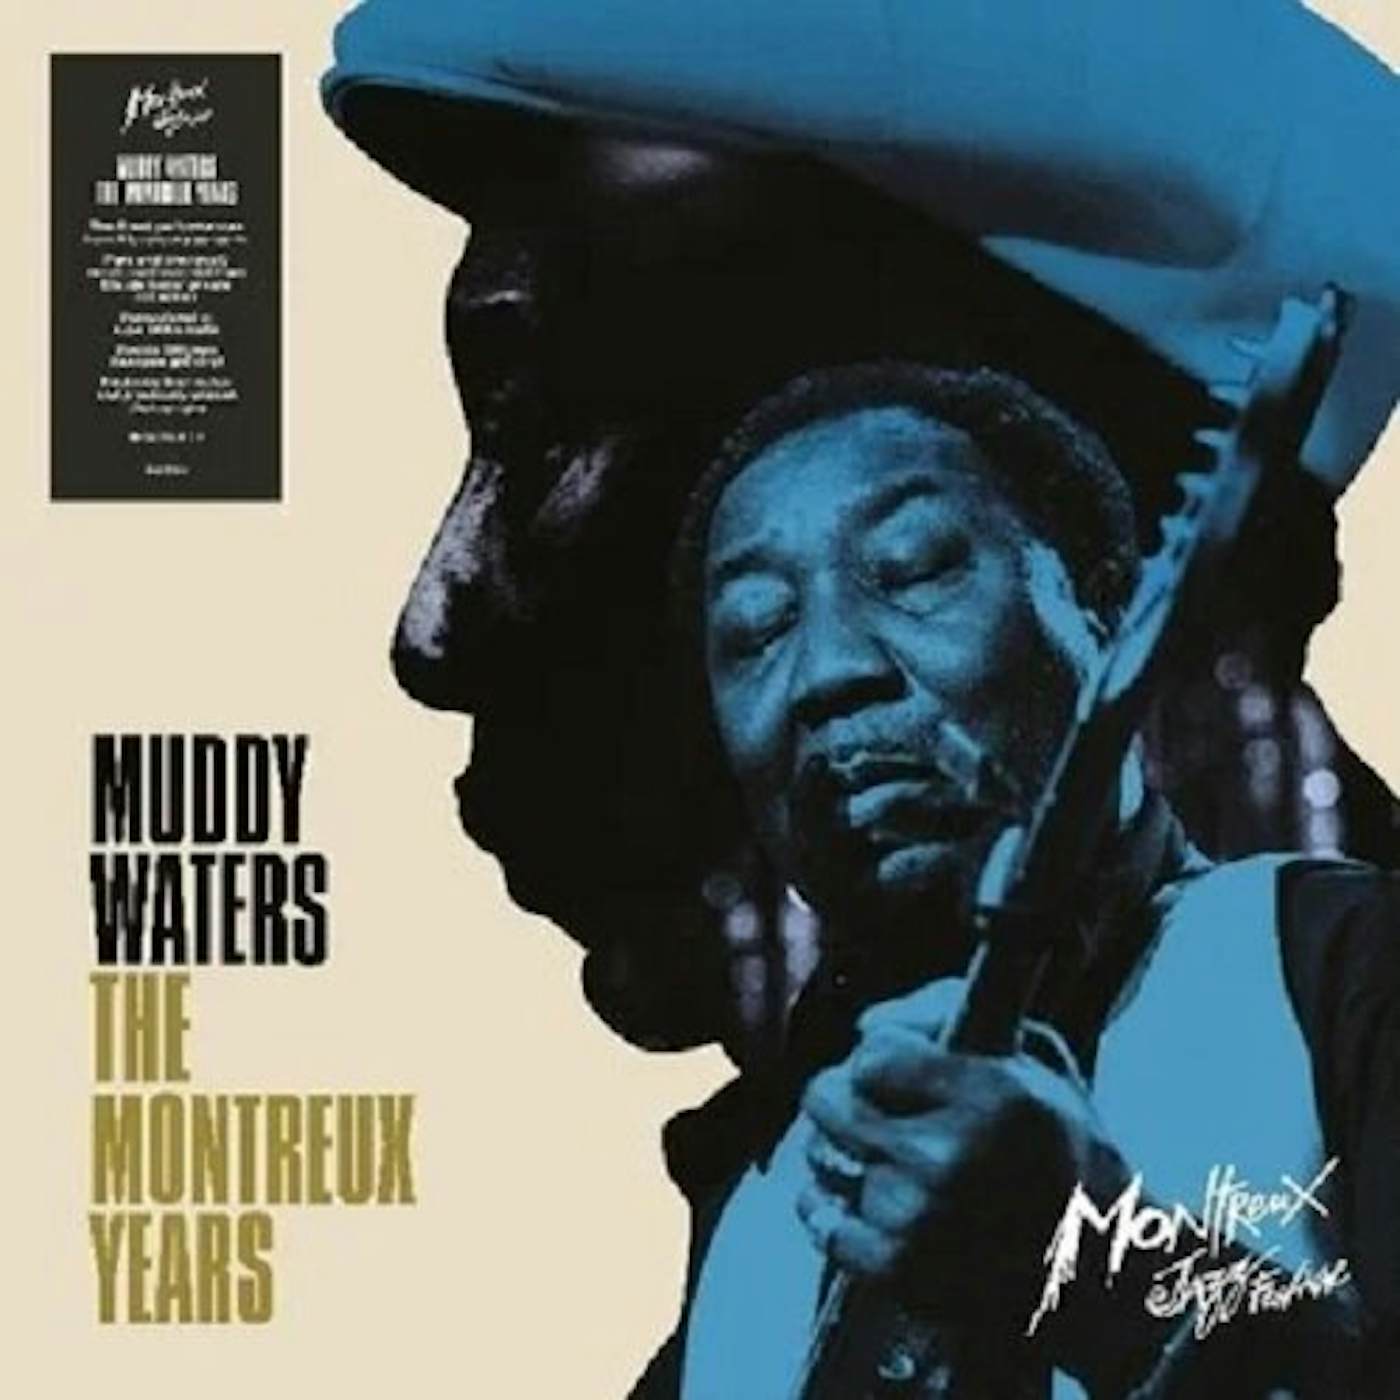 MUDDY WATERS: THE MONTREUX YEARS Vinyl Record